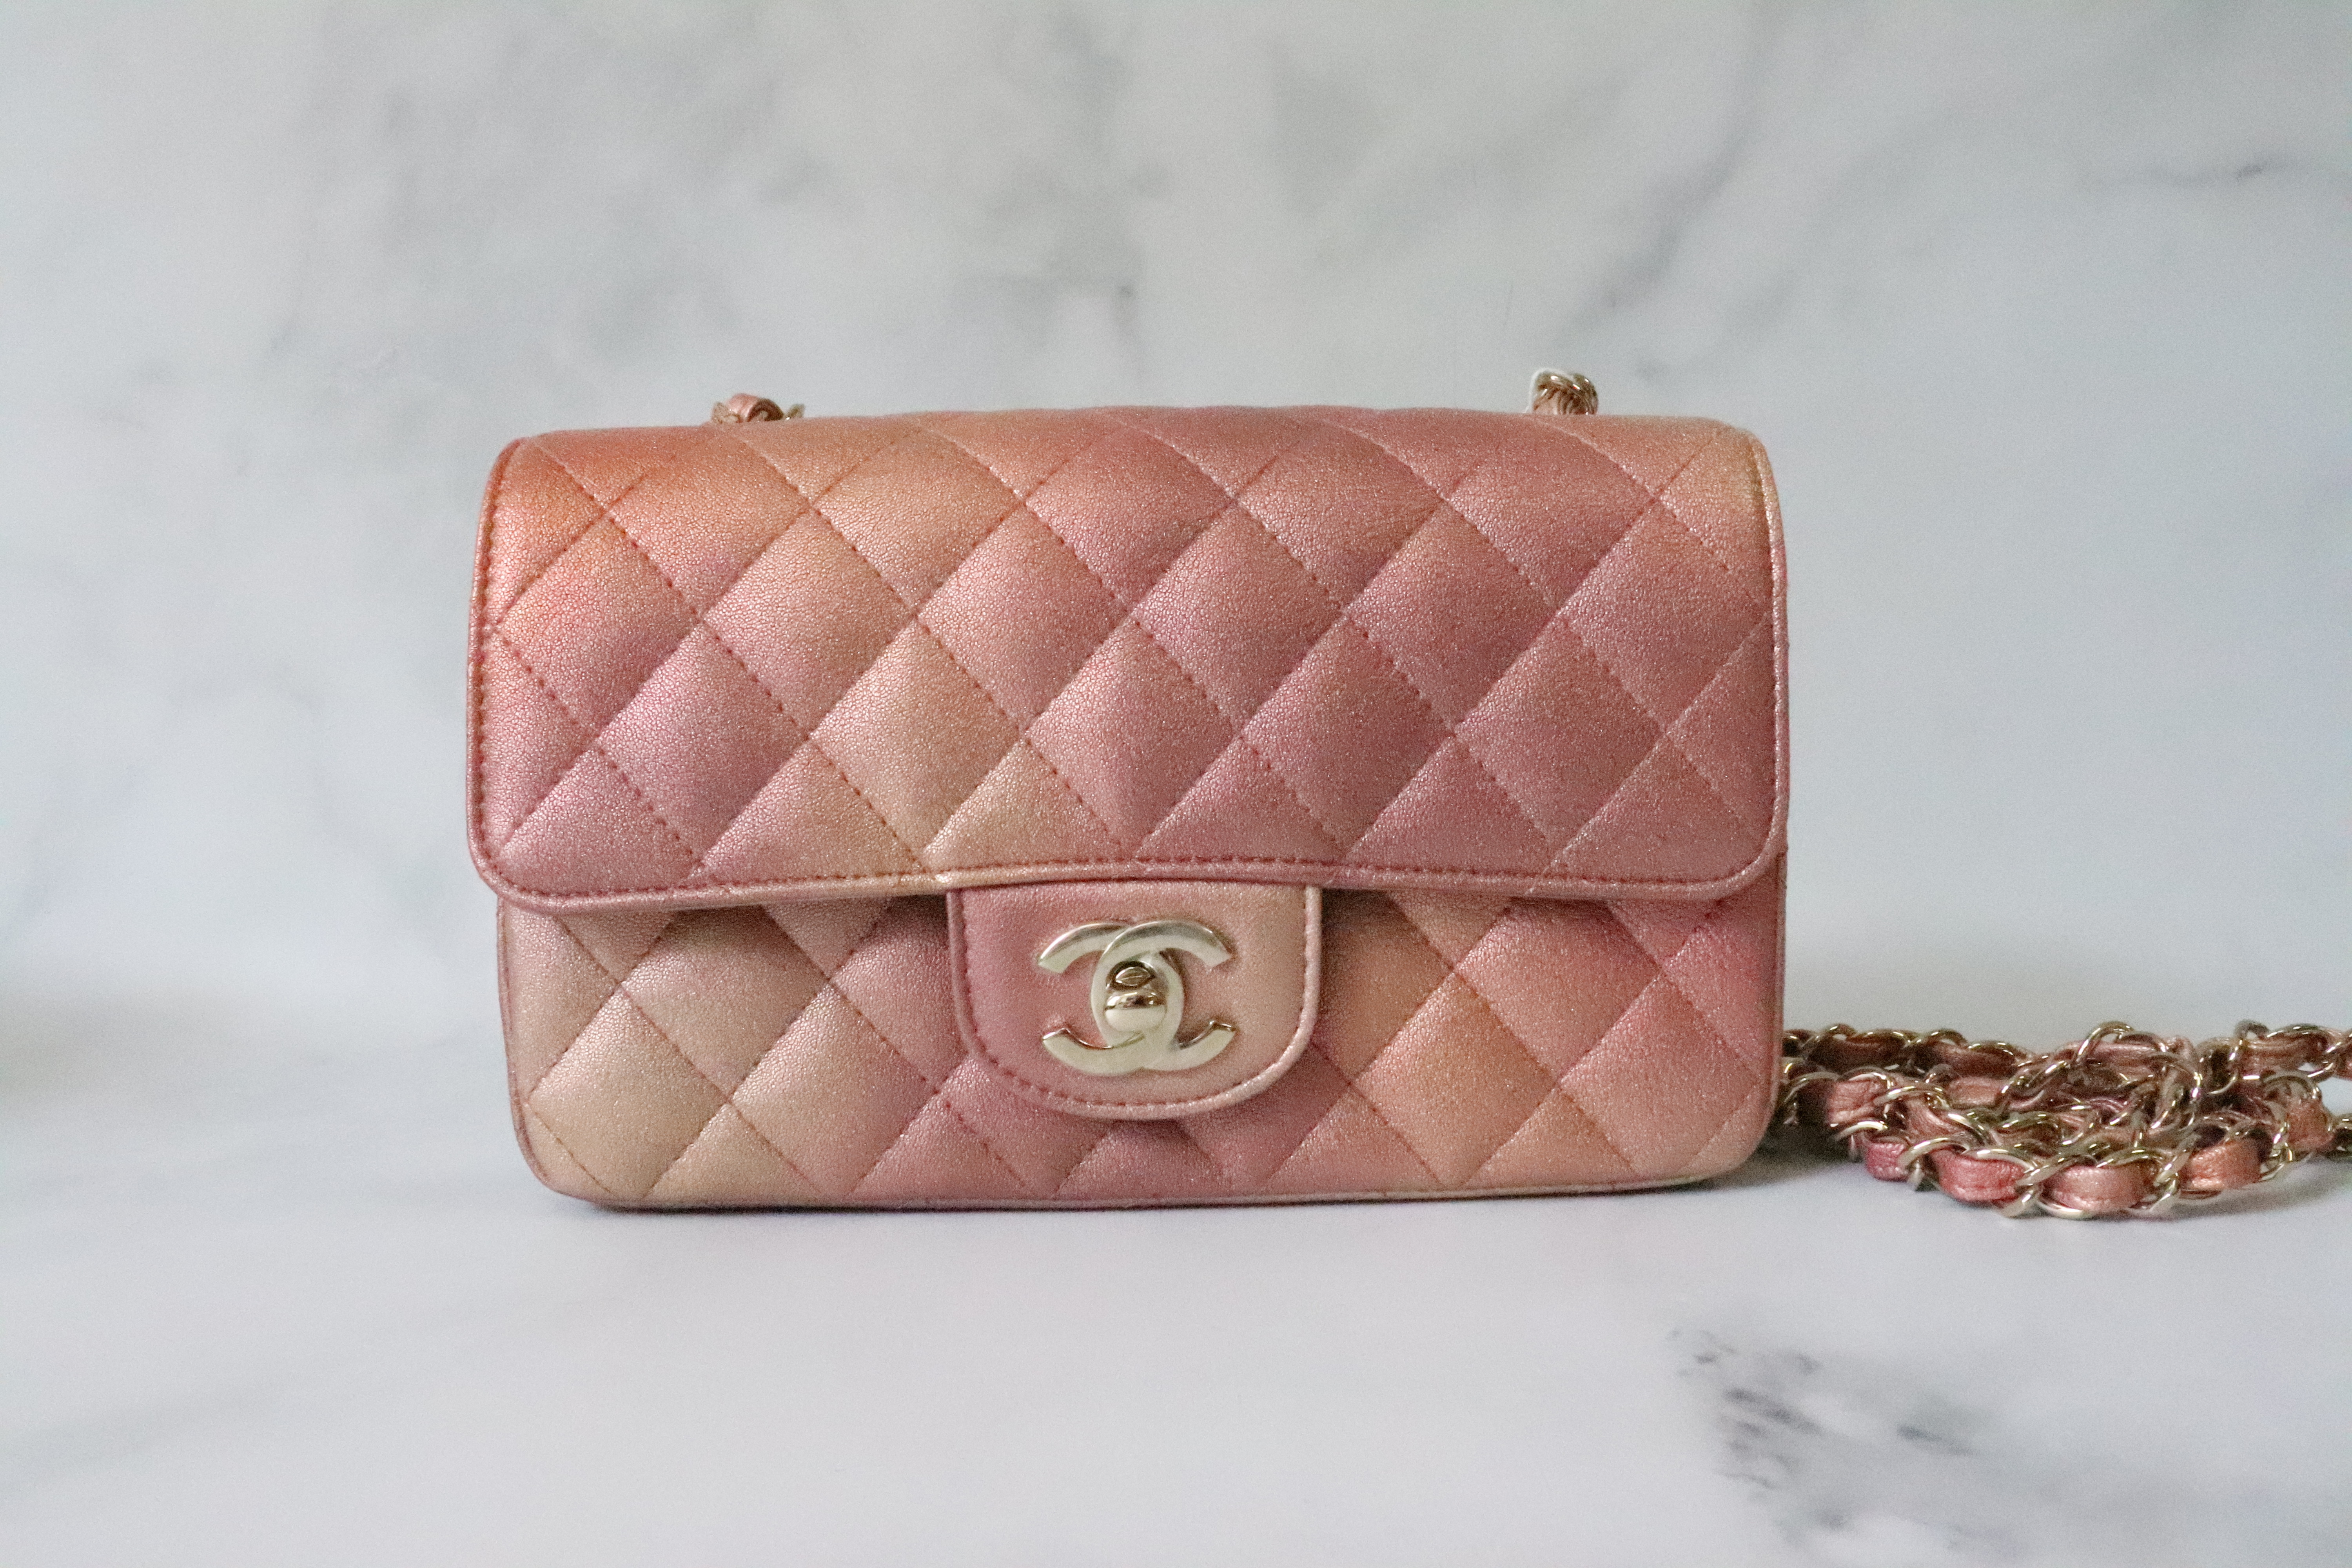 Chanel Mini, 21S Rose Gold Lambskin Leather, Gold Hardware, New in Box